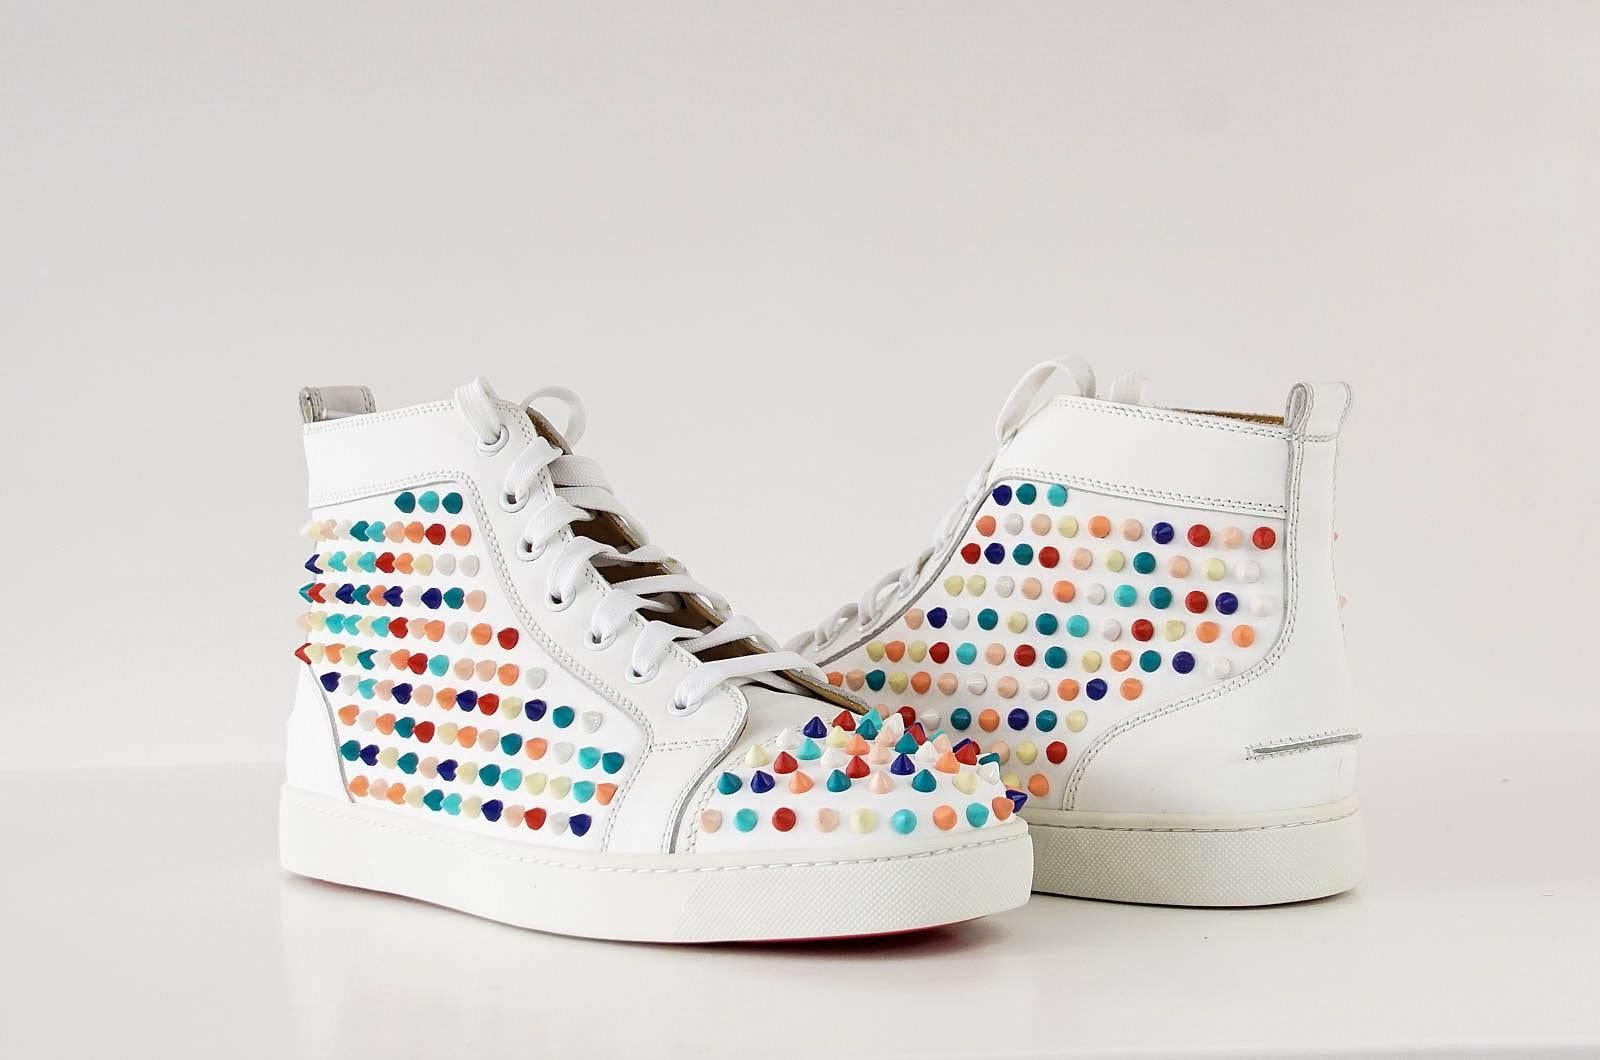 Guaranteed authentic CHRISTIAN LOUBOUTIN men's multicolored spike sneaker.
Crisp white with candy spike sneaker.
Logo plaque on side of shoe.
Comes with box and sleeper.
NEW or NEVER WORN. 
final sale

SIZE 43
USA SIZE 10

CONDITION:
NEW or NEVER